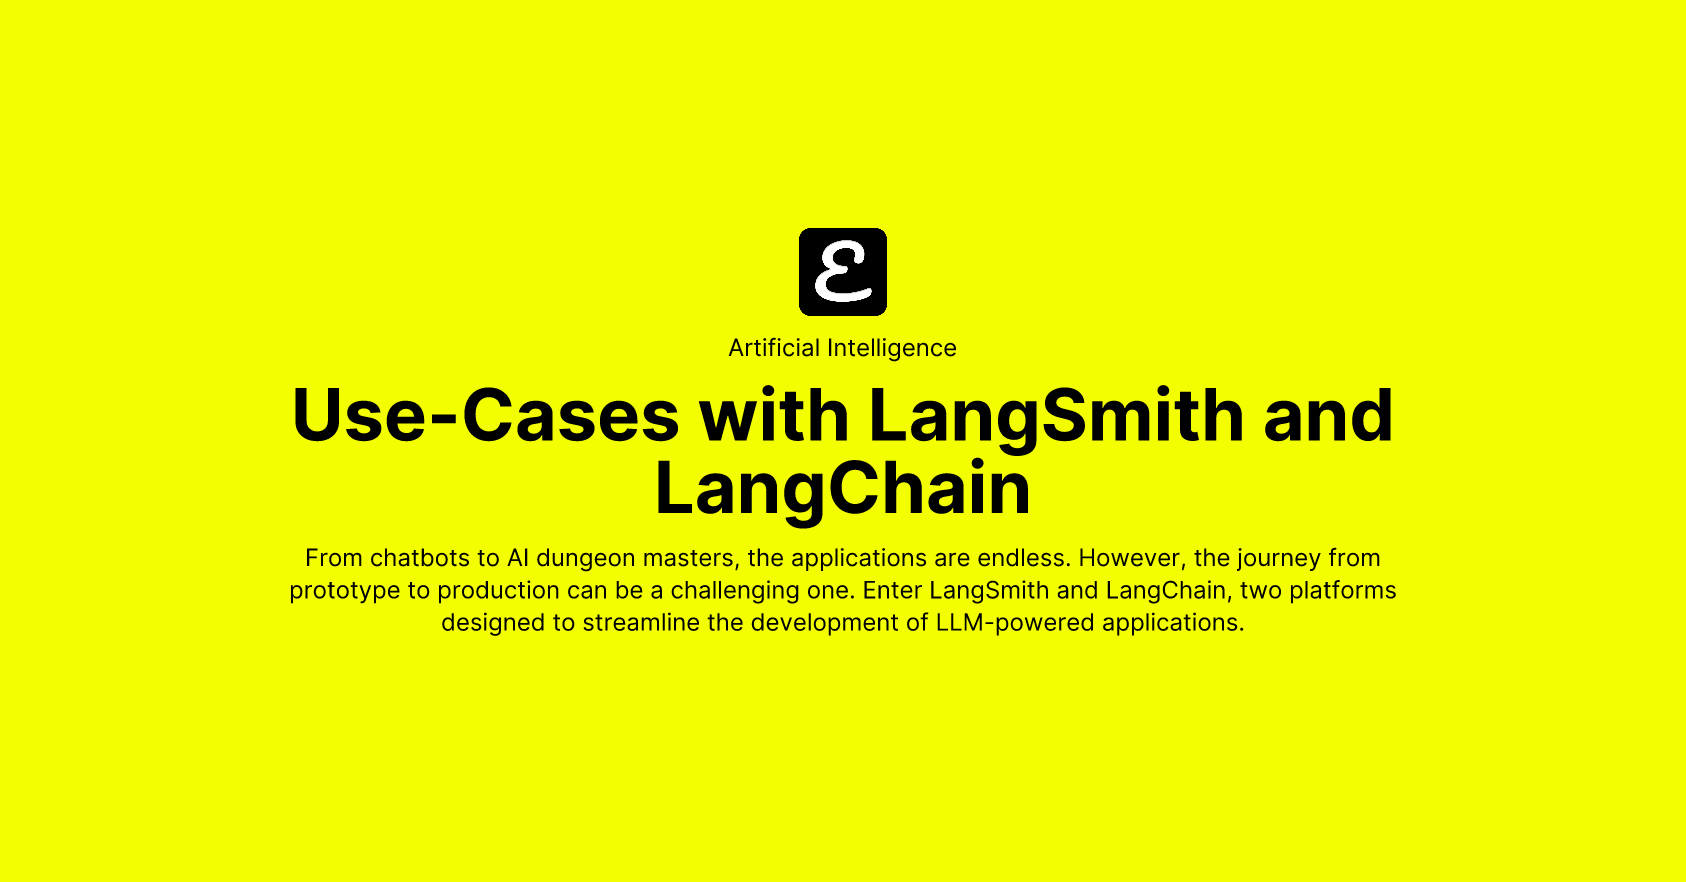 Use-Cases with LangSmith and LangChain by Eric David Smith